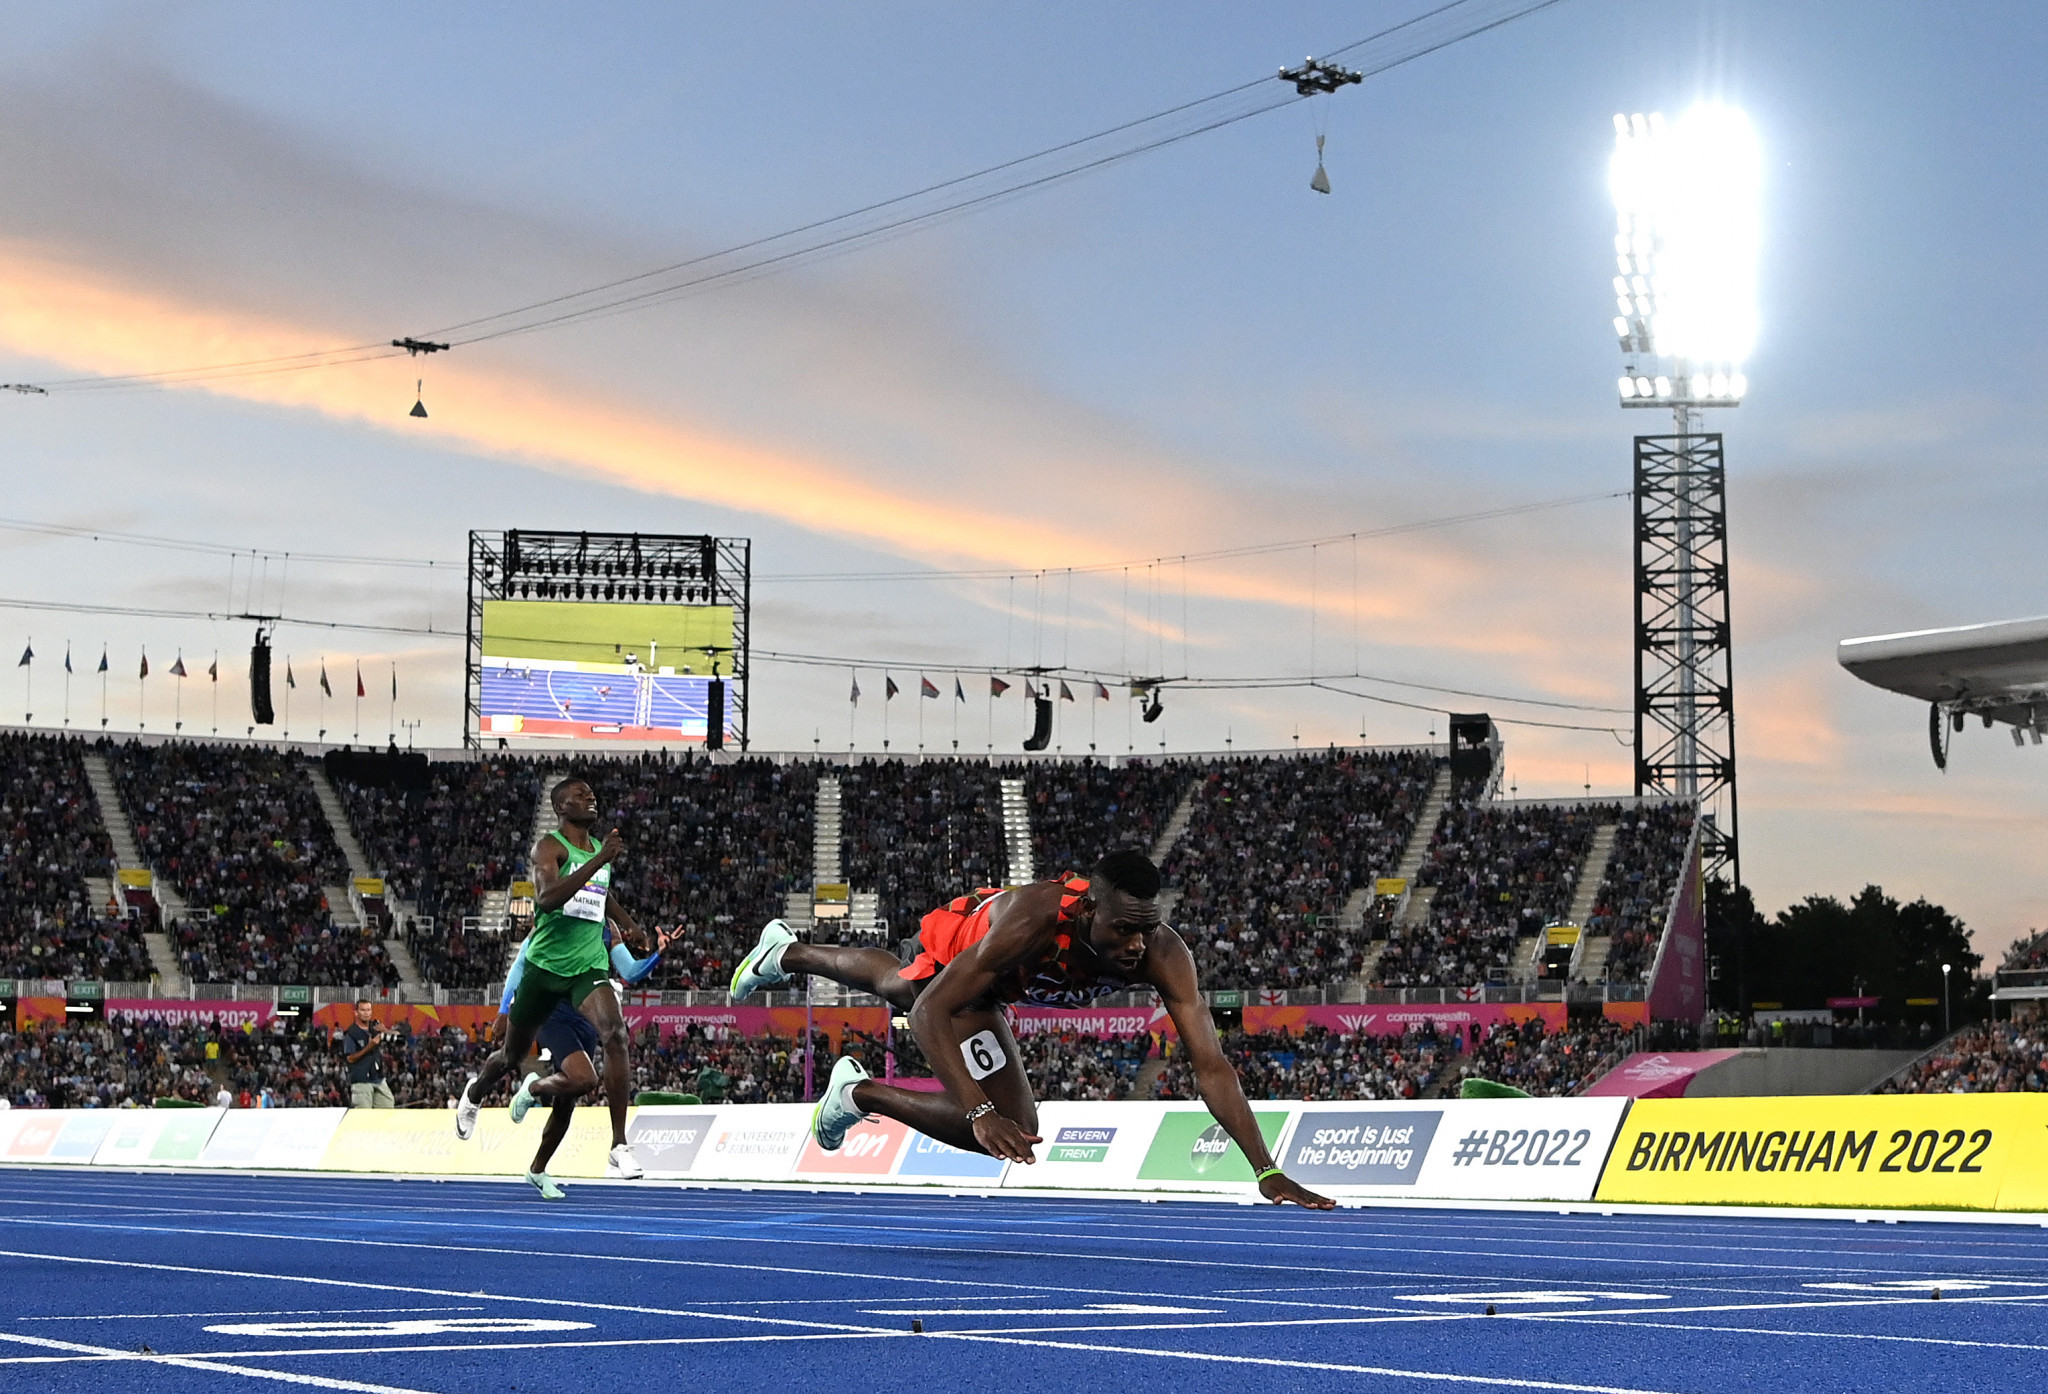 Wiseman Were Mukhobe of Kenya dived for the line in the men's 400m hurdles, but could not claim bronze ©Getty Images